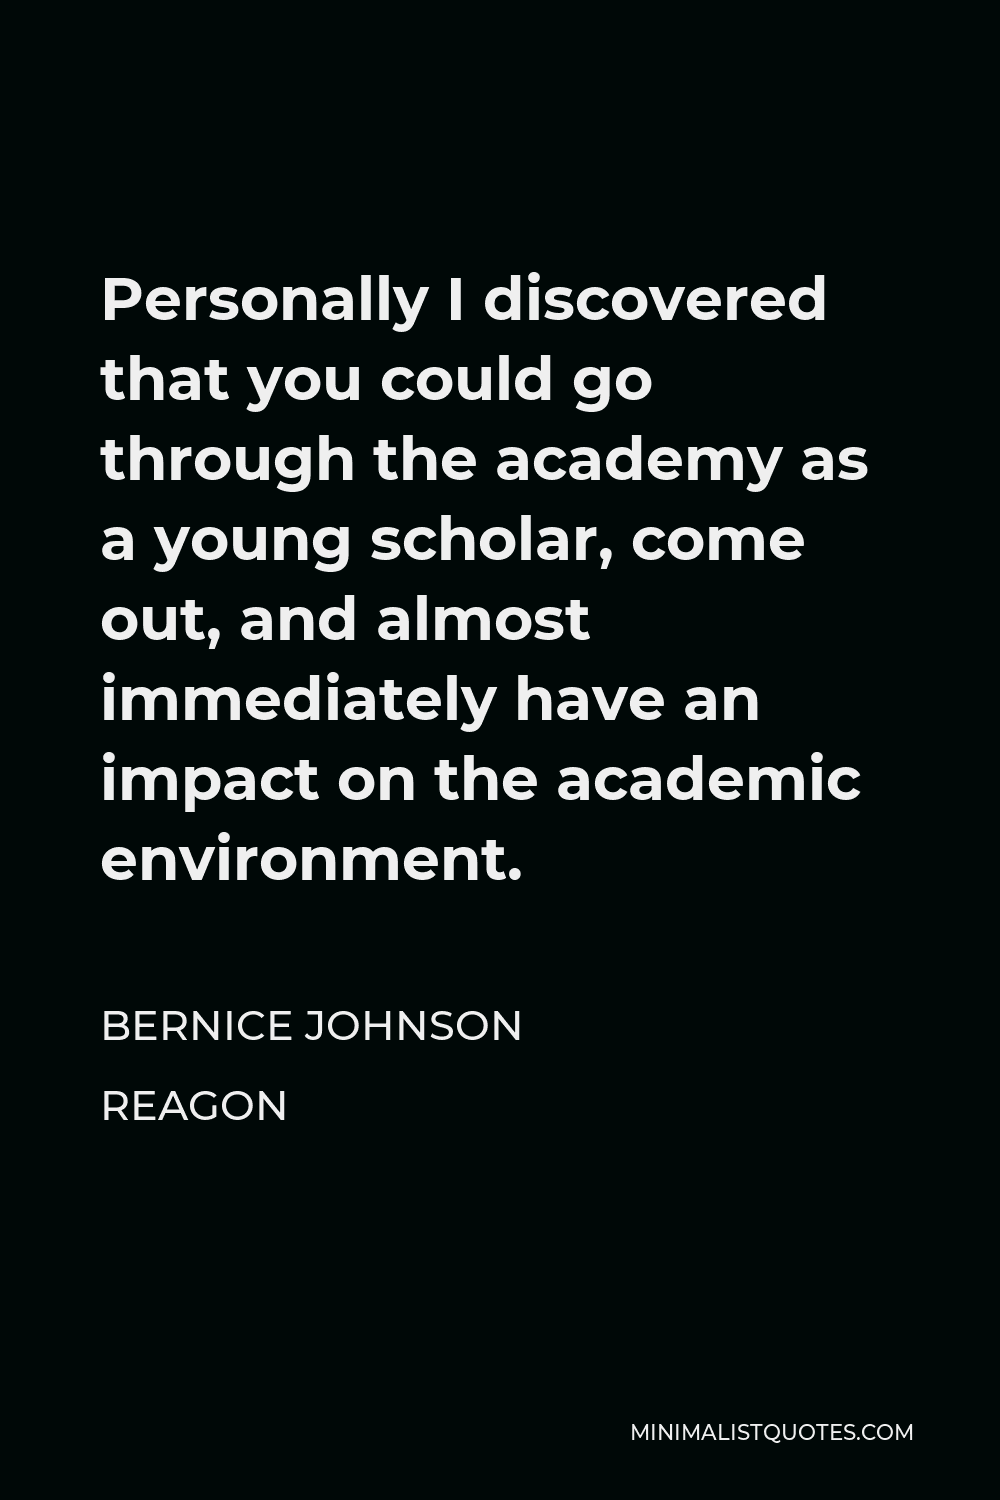 Bernice Johnson Reagon Quote - Personally I discovered that you could go through the academy as a young scholar, come out, and almost immediately have an impact on the academic environment.